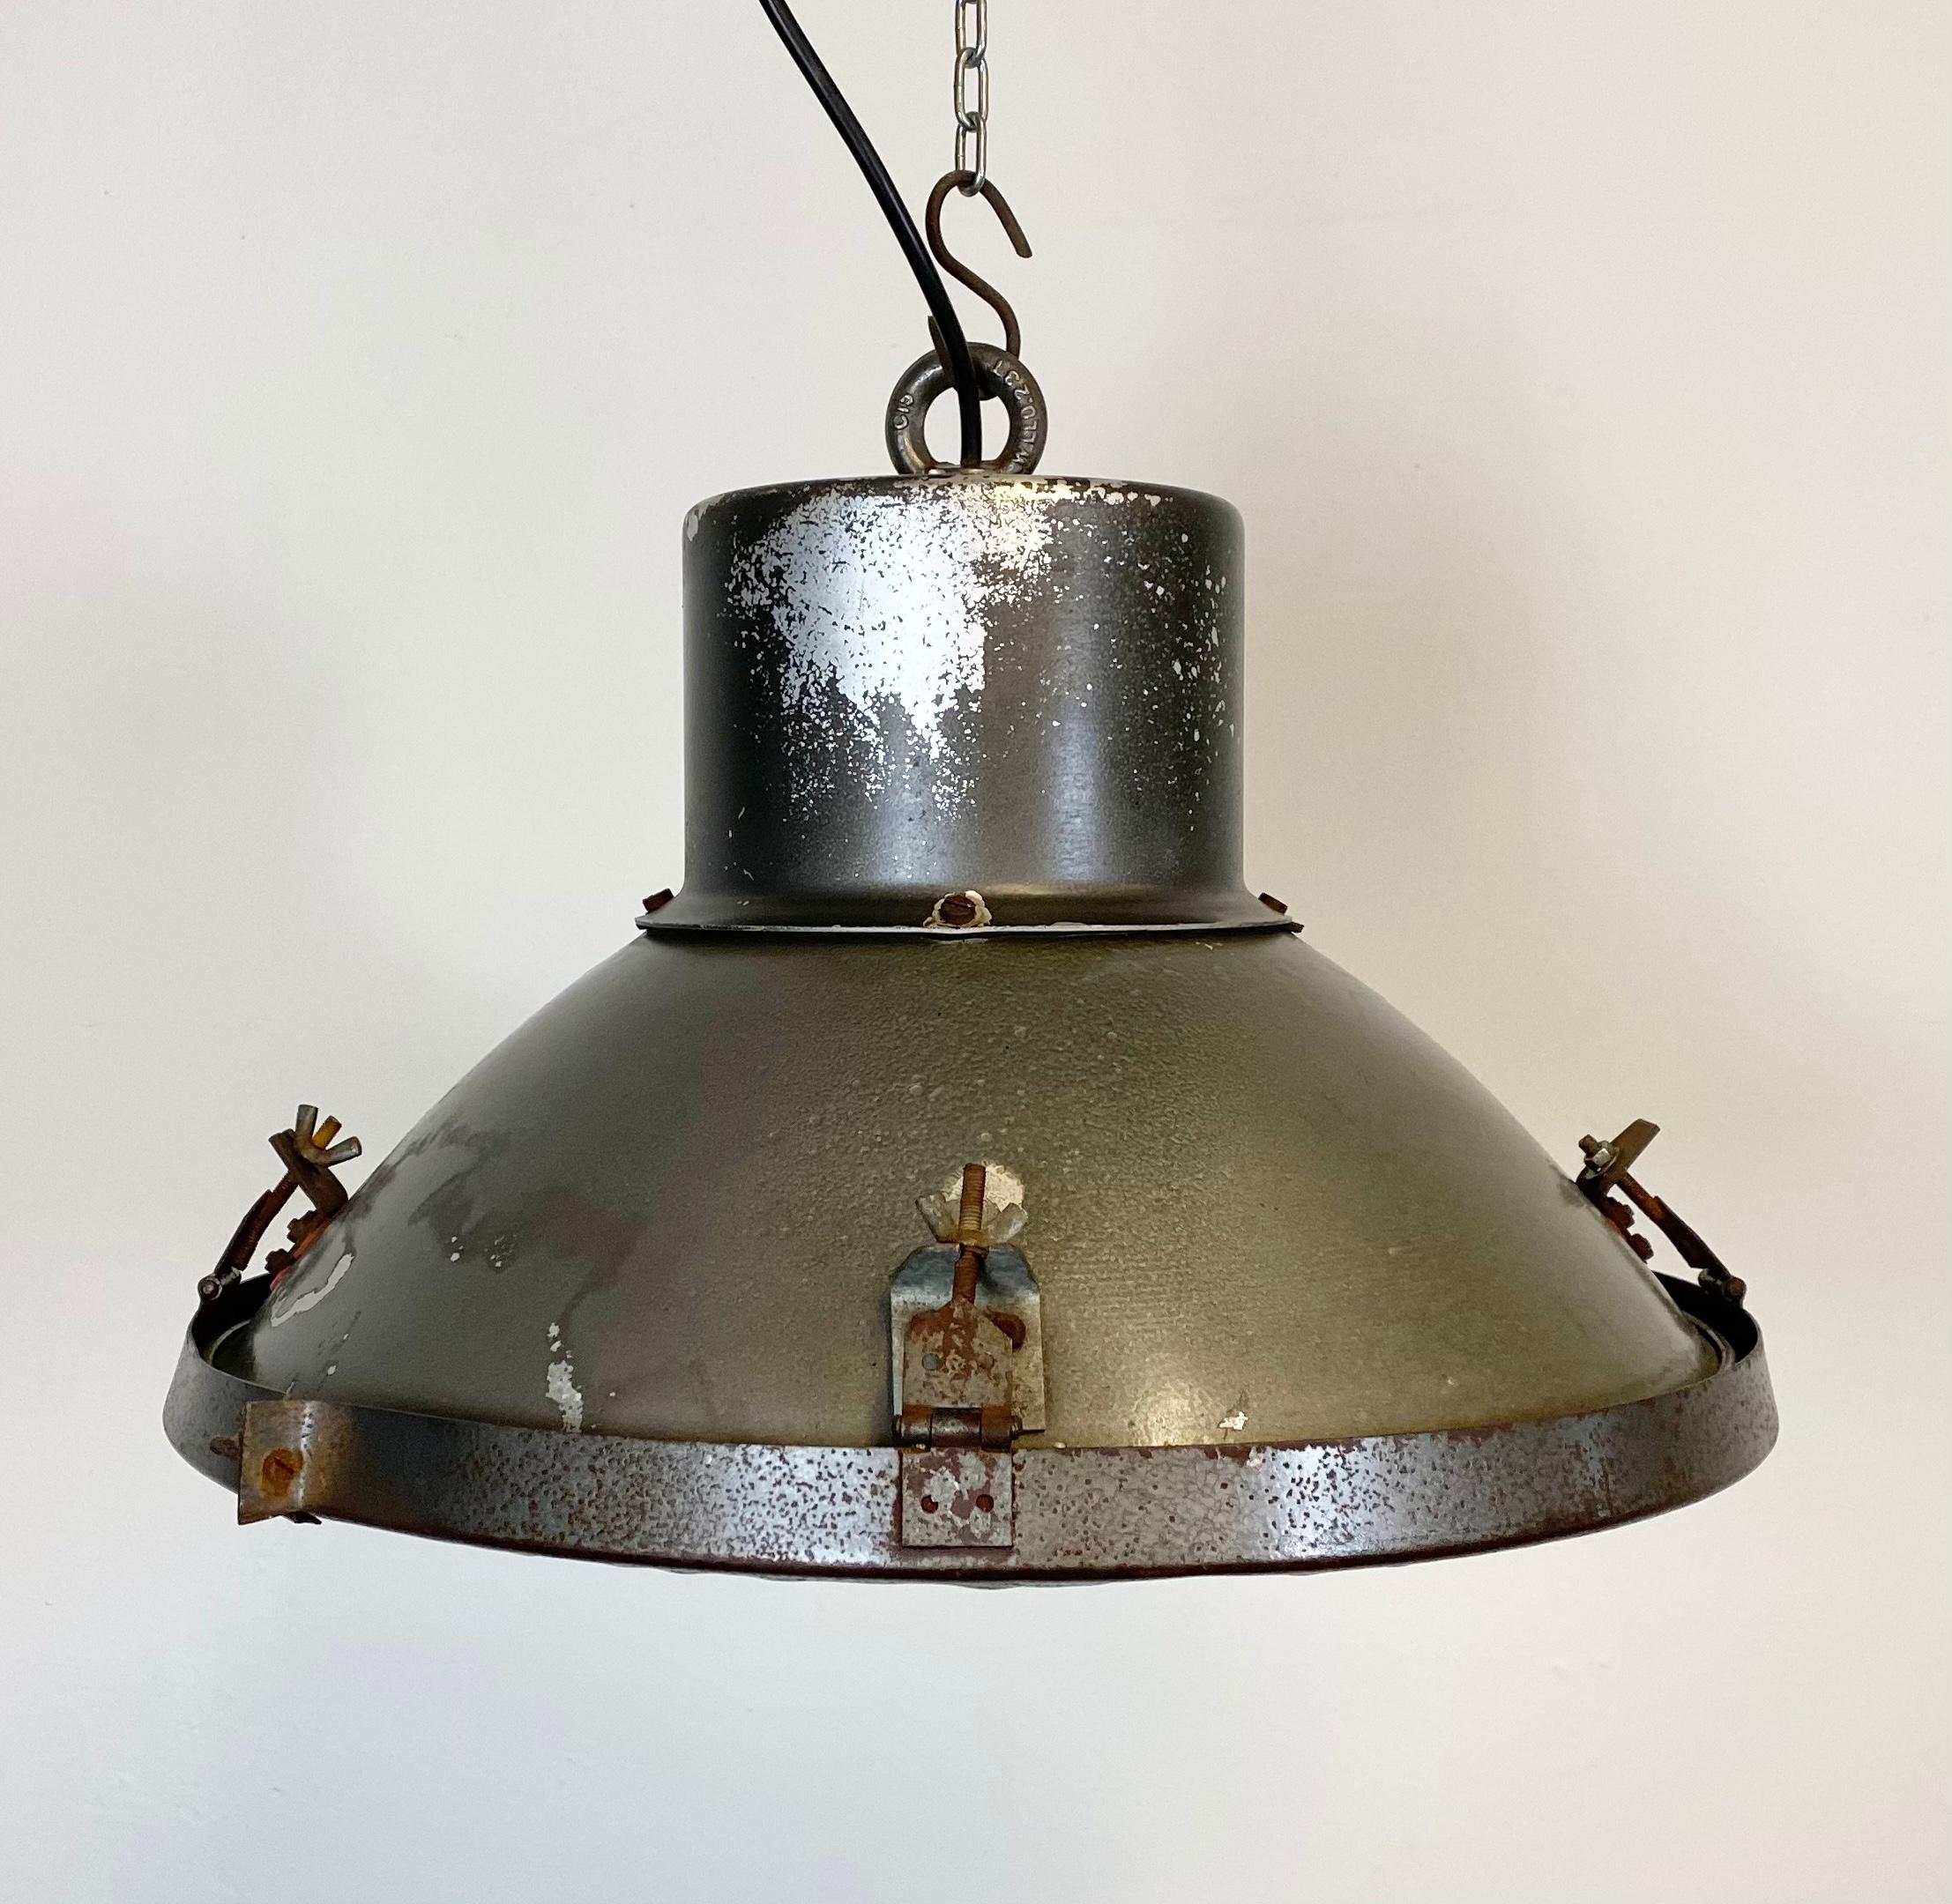 Industrial lamp made in former Czechoslovakia during the 1960s.It features an aluminum body, an iron top and clear glass cover. New porcelain socket for E 27 lightbulbs and wire.
The weight of the lamp is 3 kg.